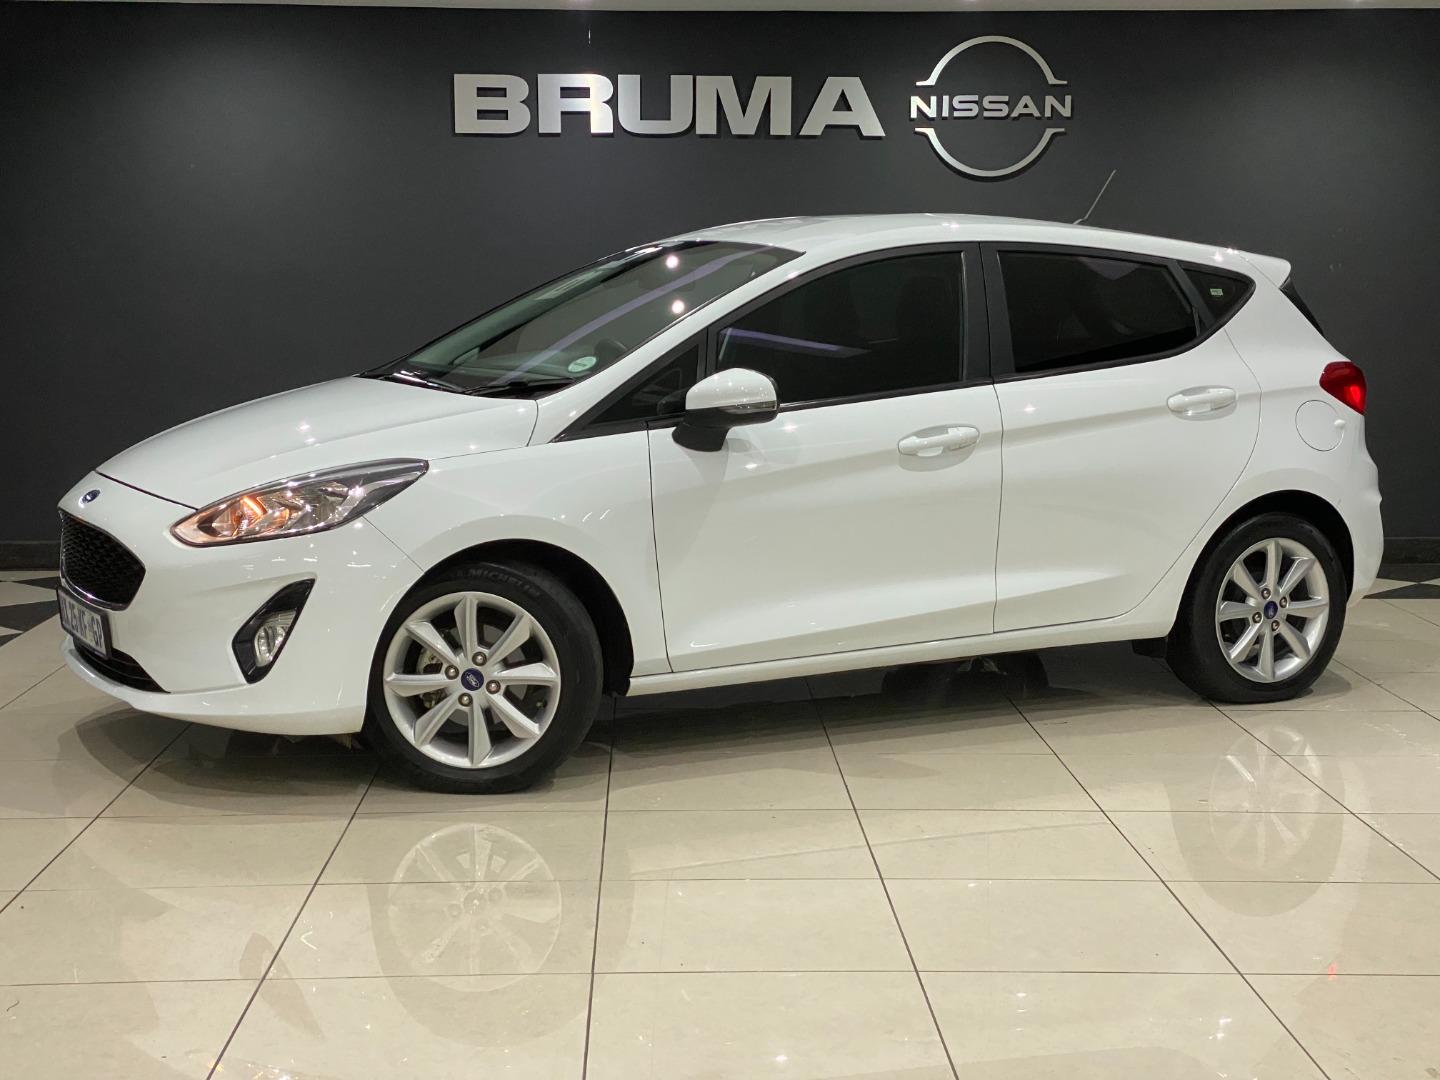 2019 Ford Fiesta 1.0 Ecoboost Trend Powershift 5DR